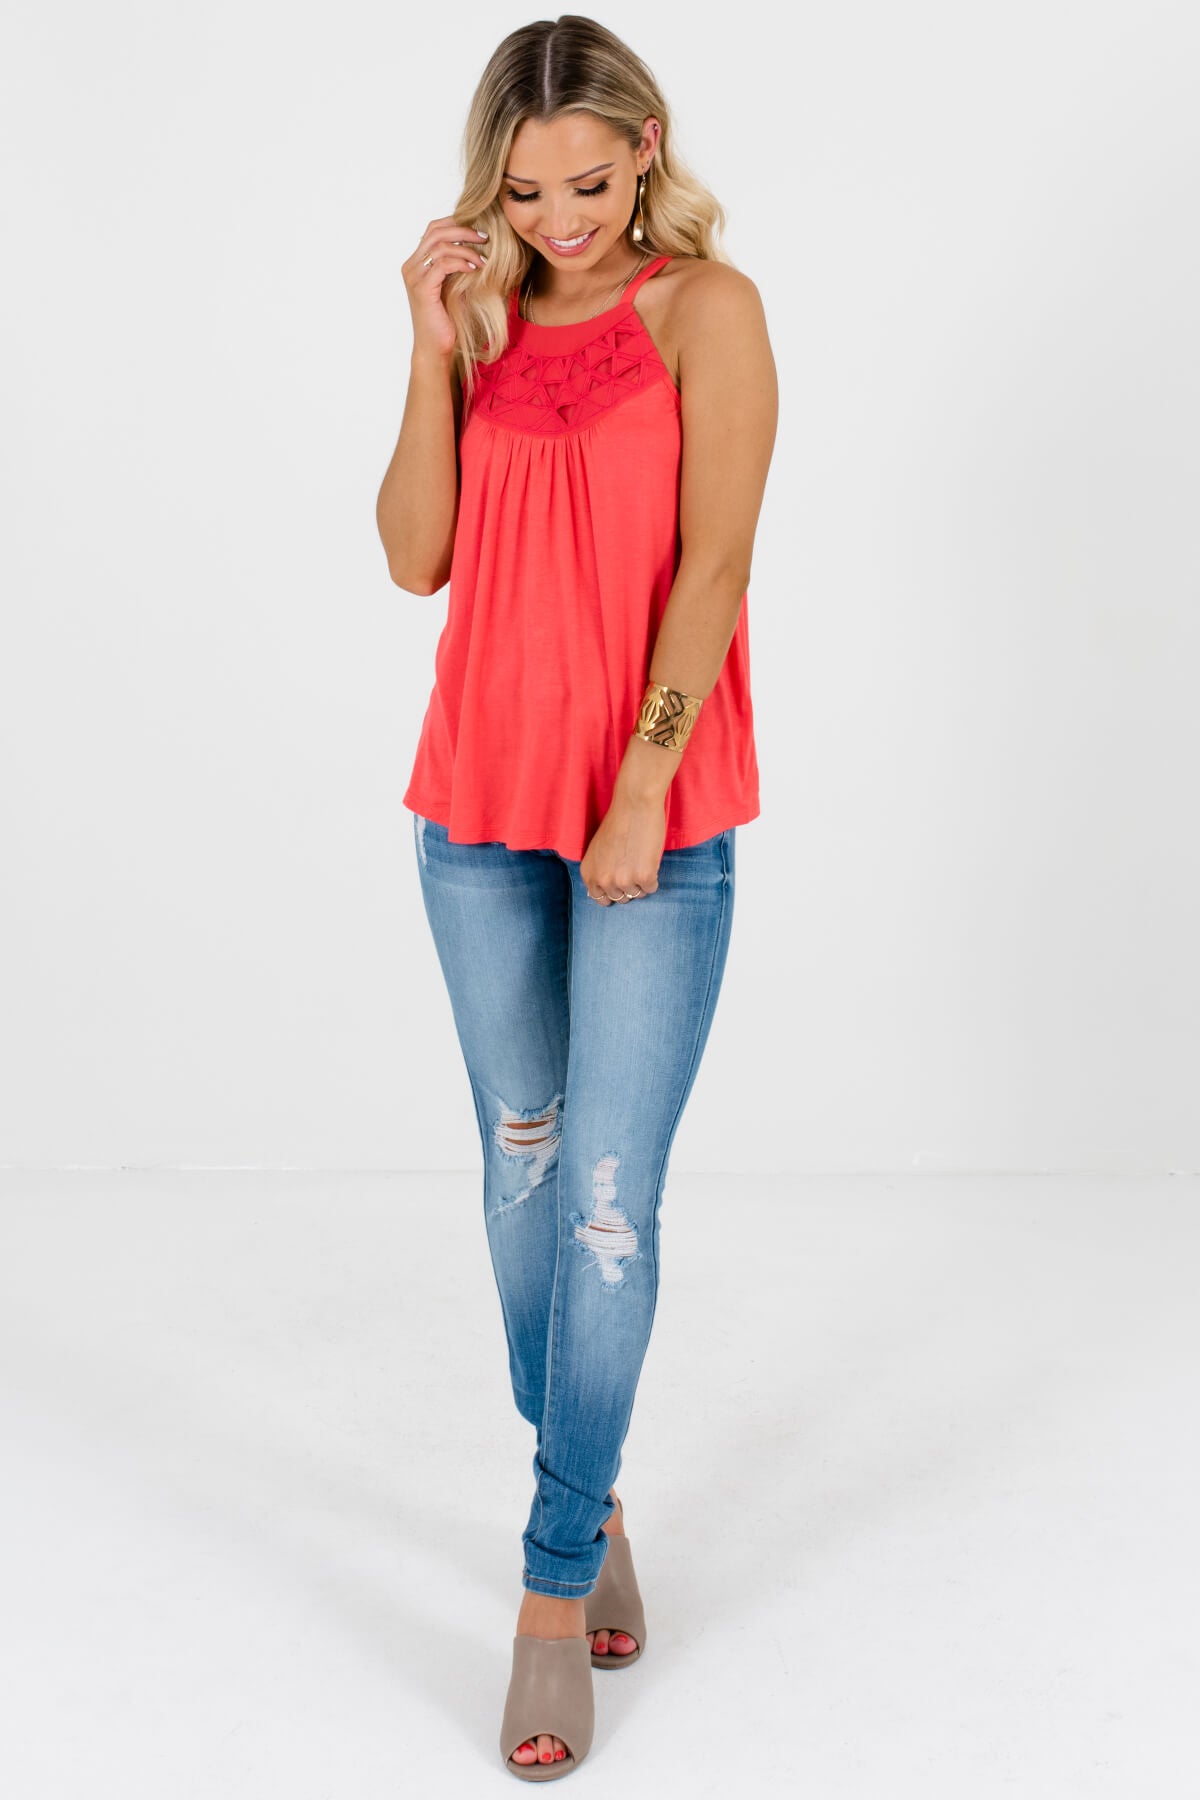 Bright Coral Tank Tops Affordable Online Boutique for Women